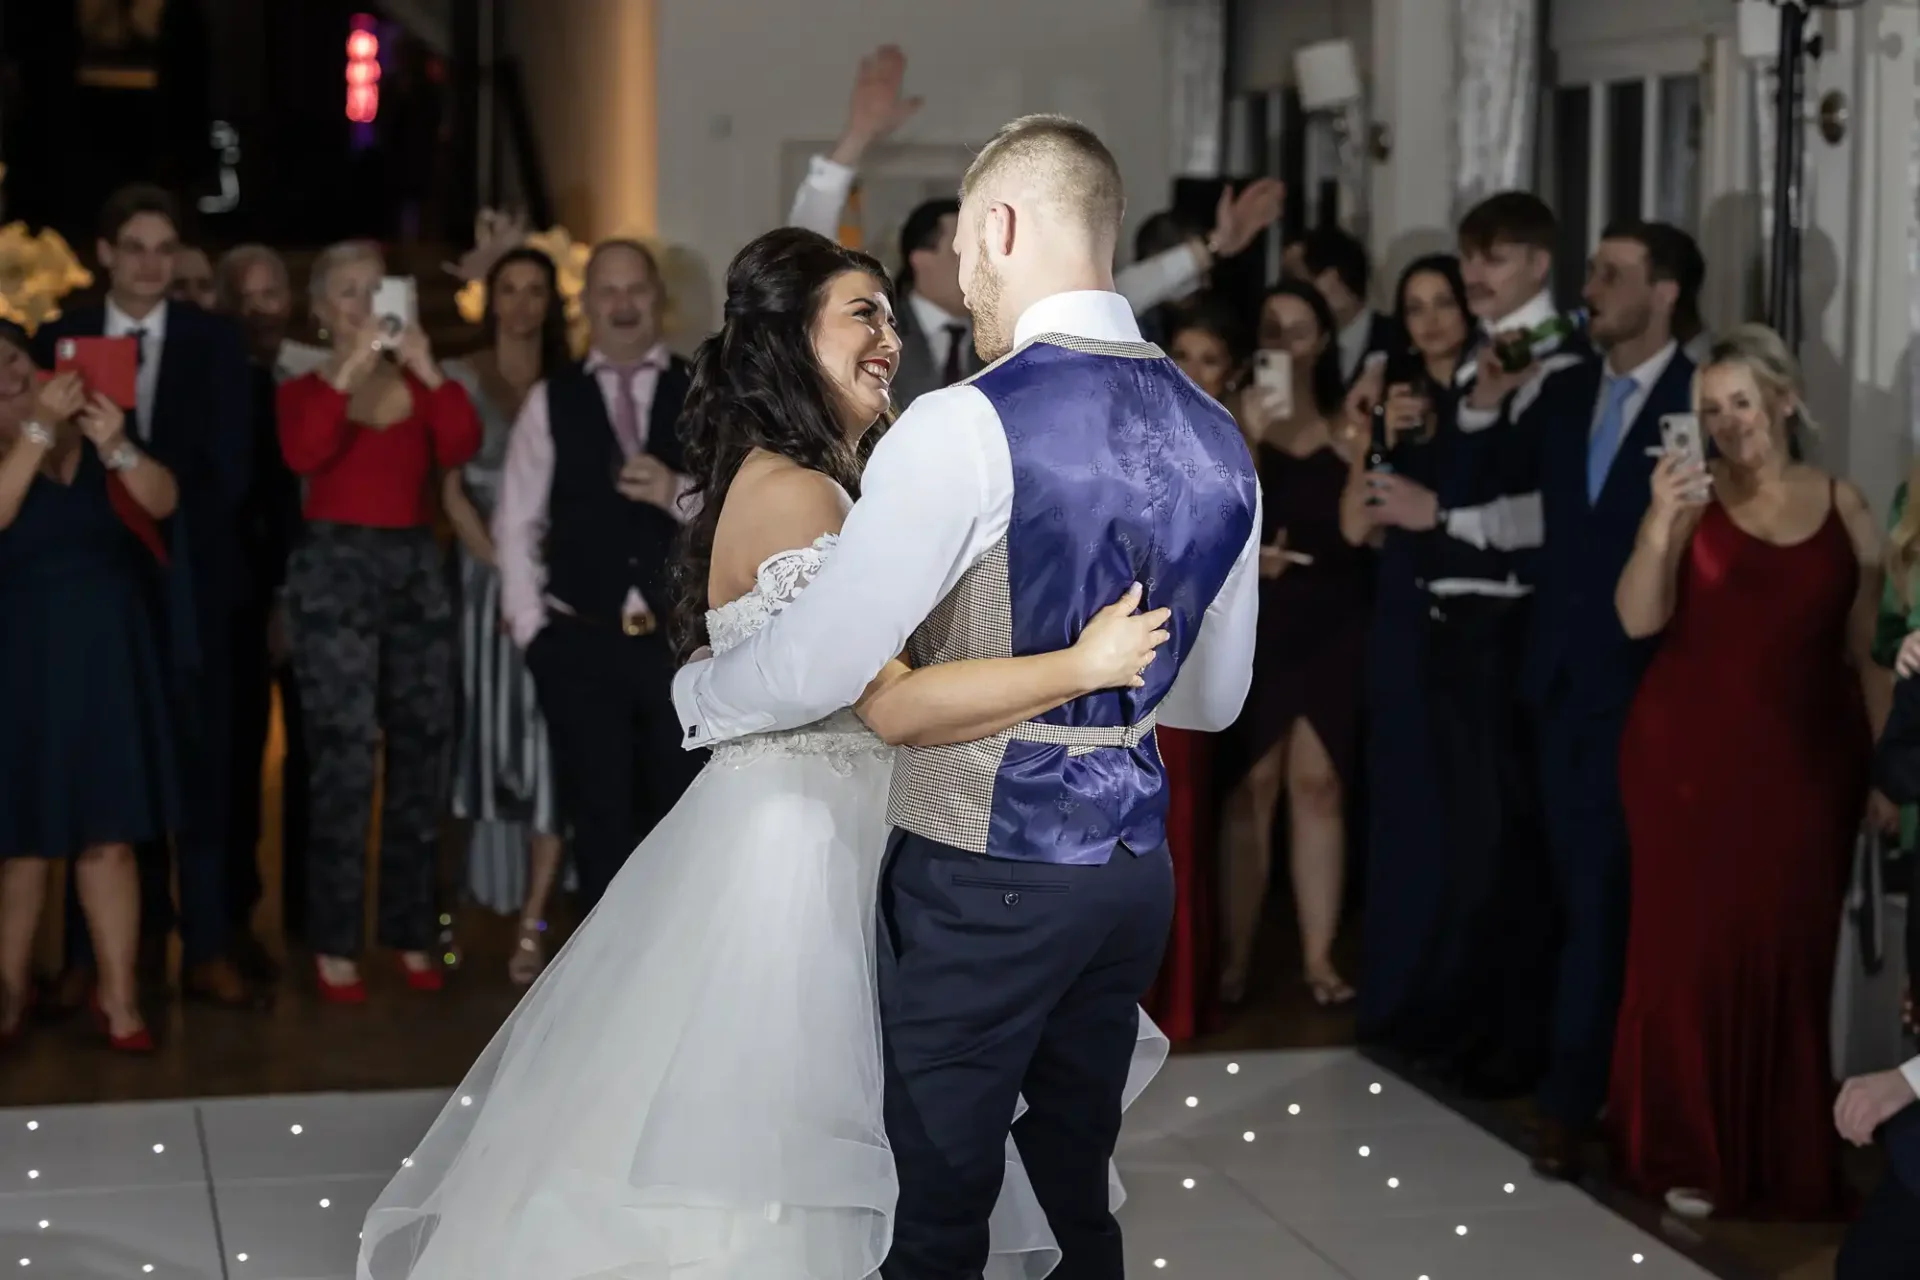 A newlywed couple dances joyfully at their wedding reception surrounded by applauding guests.